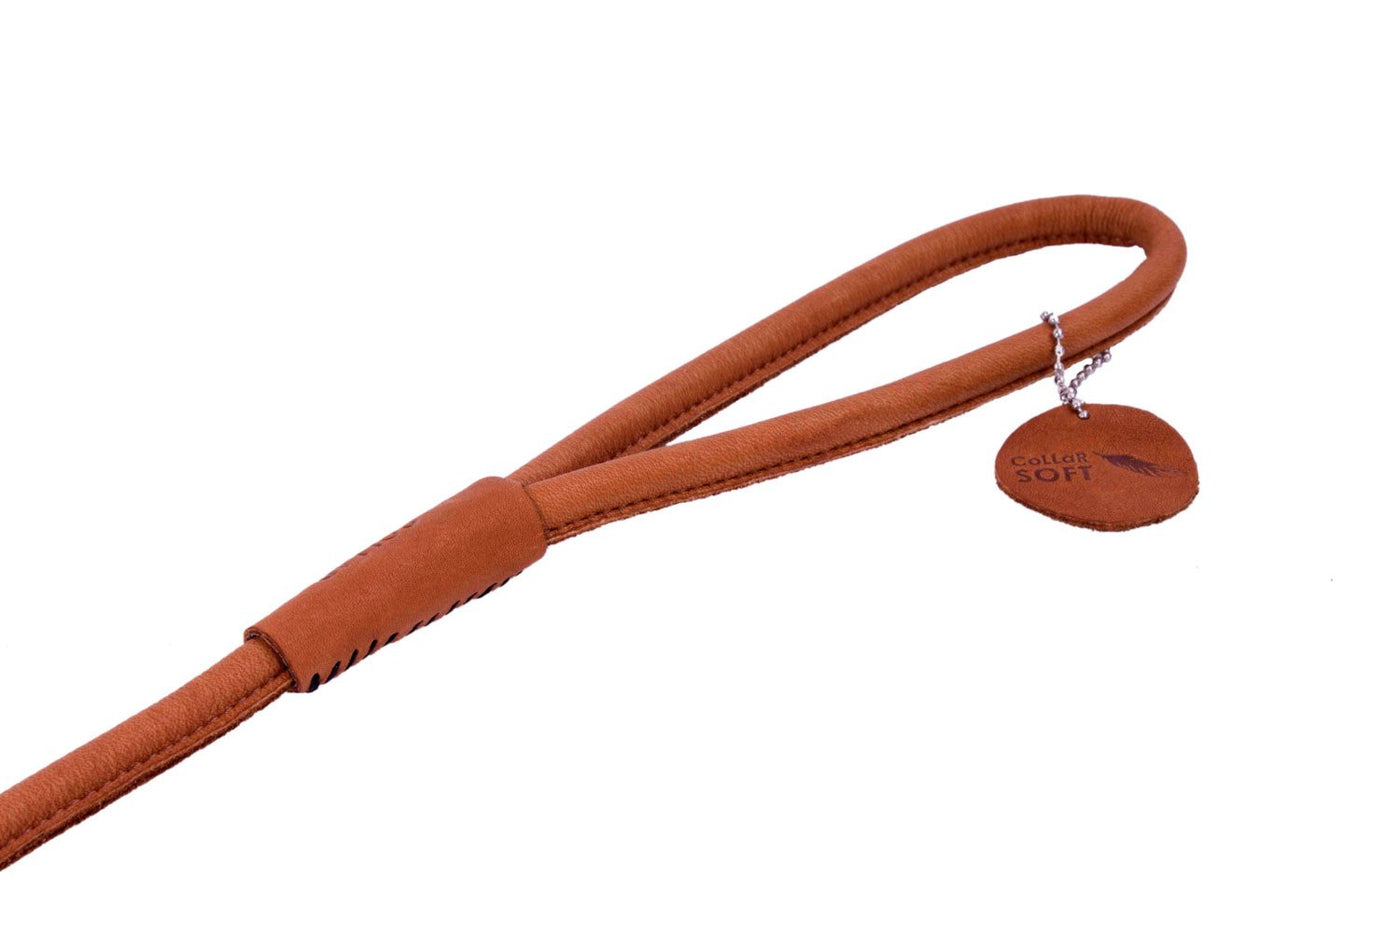 Round-stitched leather dog leash - COLLAR SOFT - black or brown - 122 cm